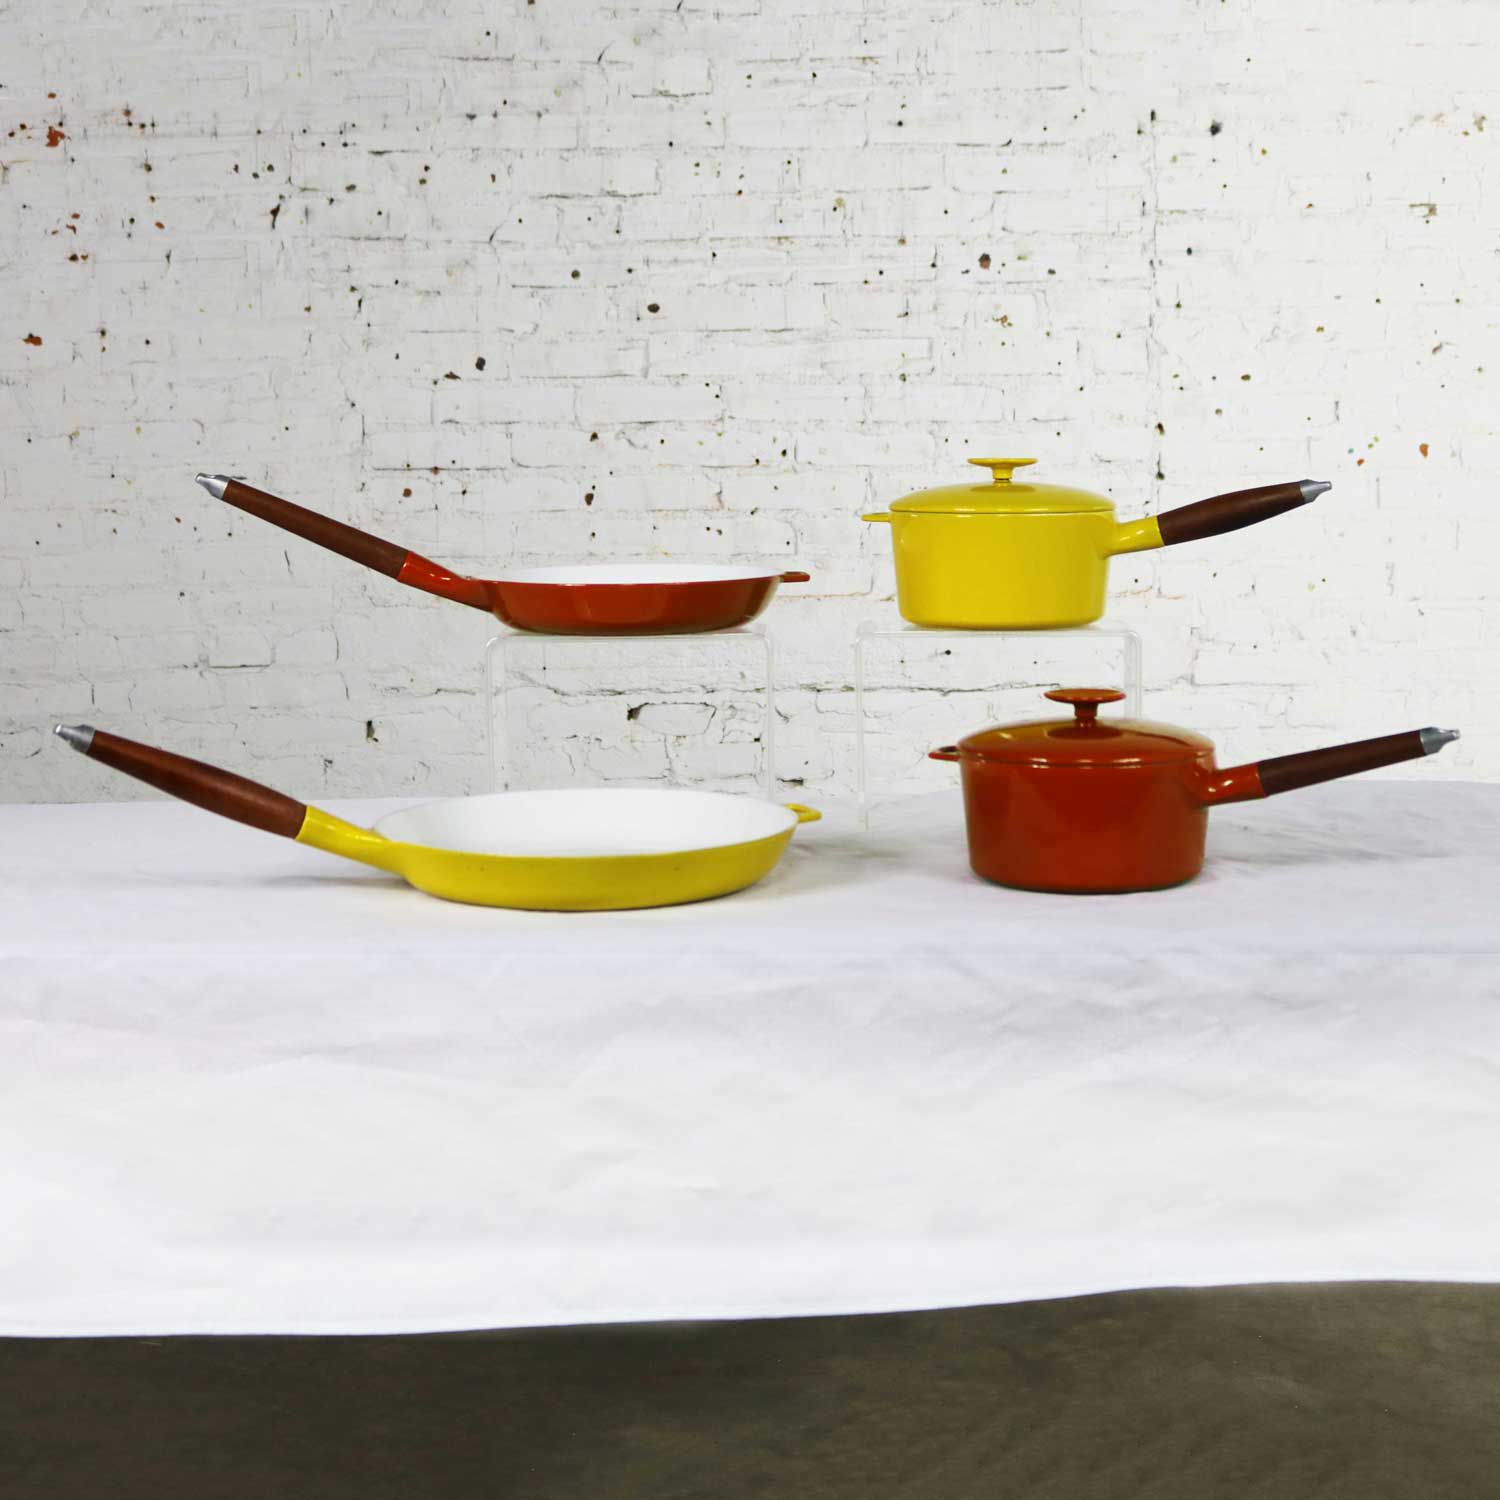 6 Pcs Mid Century Danish Modern Enameled Cast Iron Cookware by Michael Lax for Copco